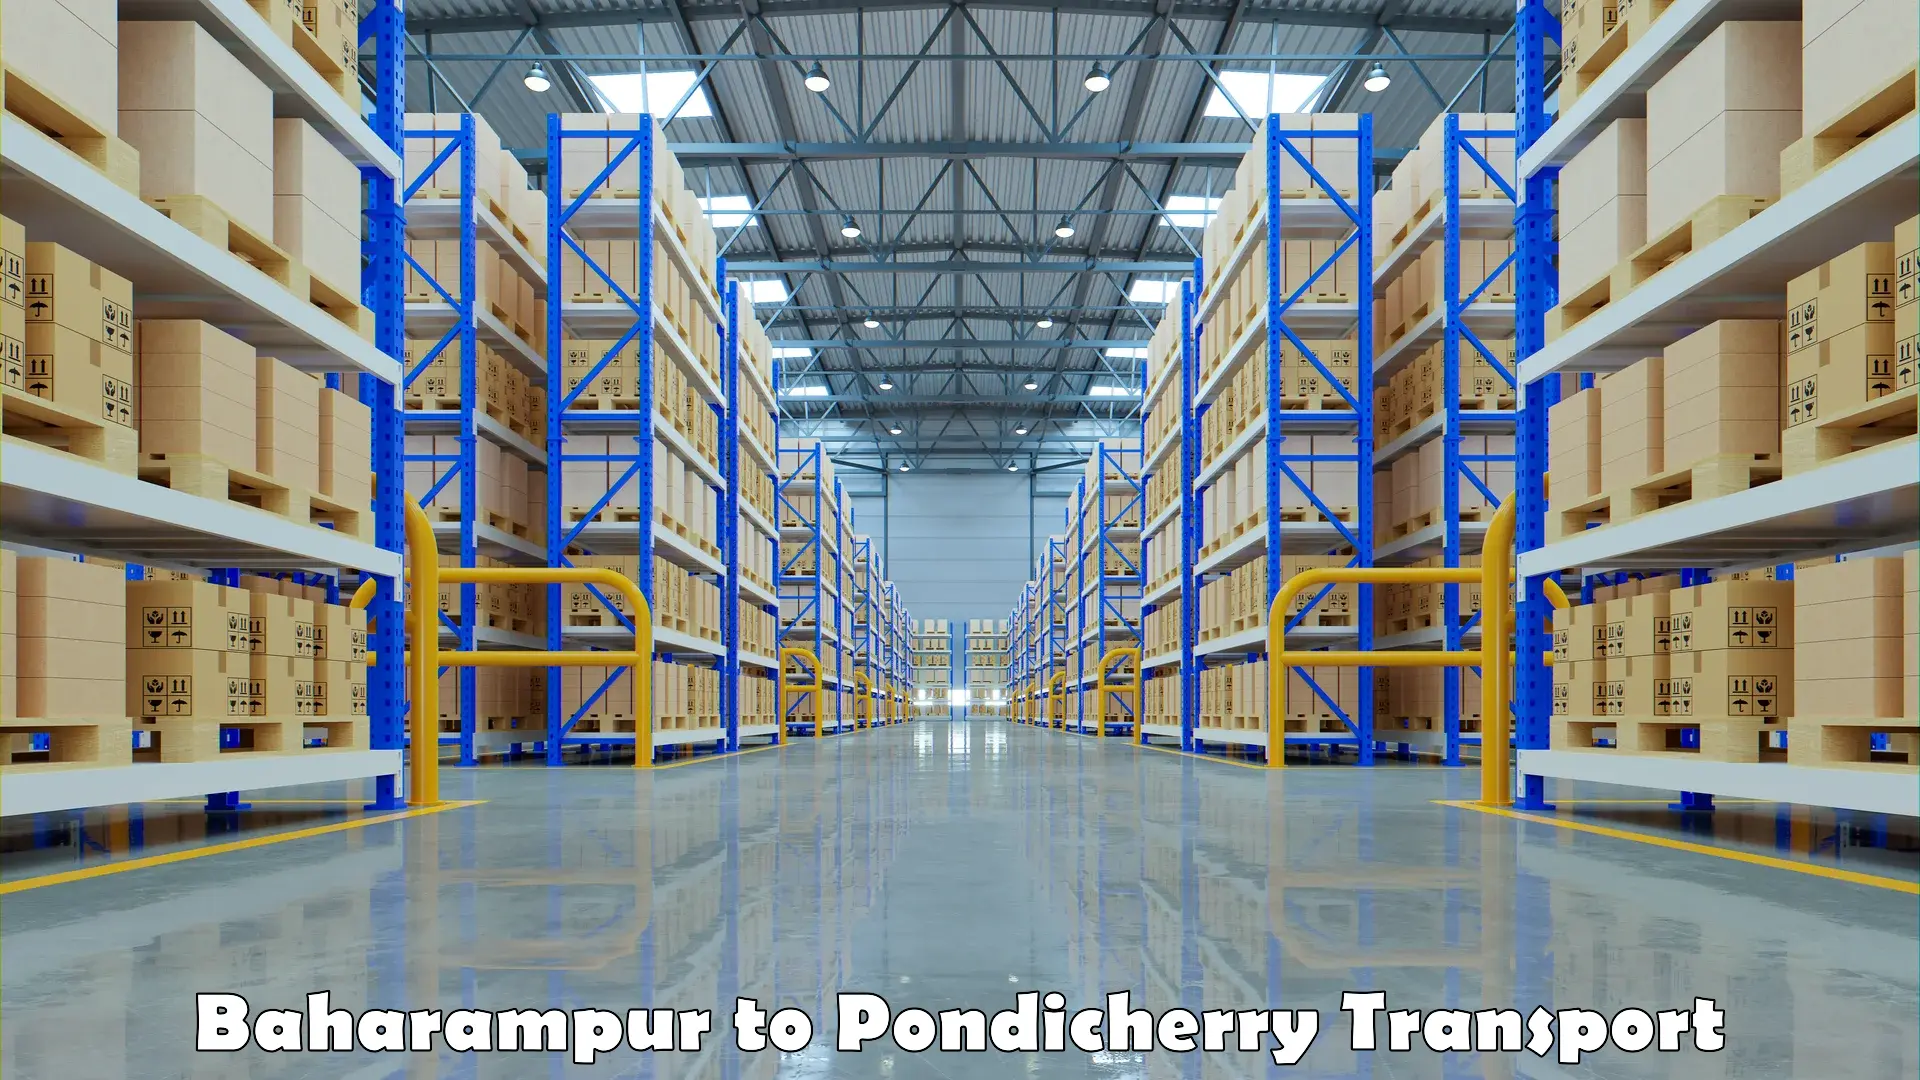 Delivery service Baharampur to Pondicherry